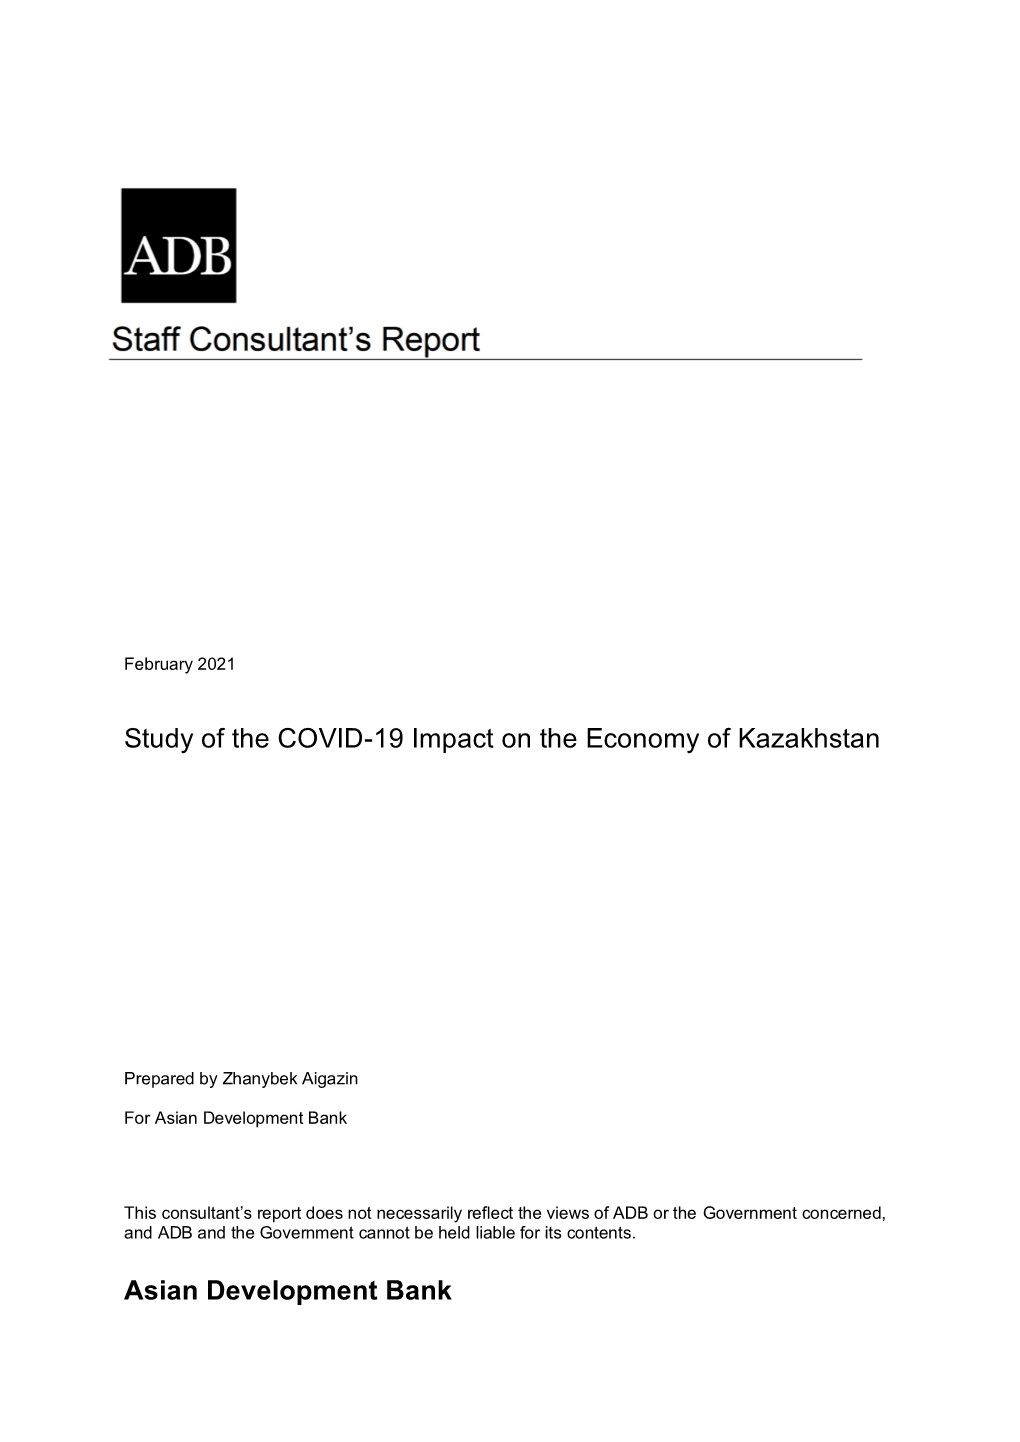 Study of the COVID-19 Impact on the Economy of Kazakhstan